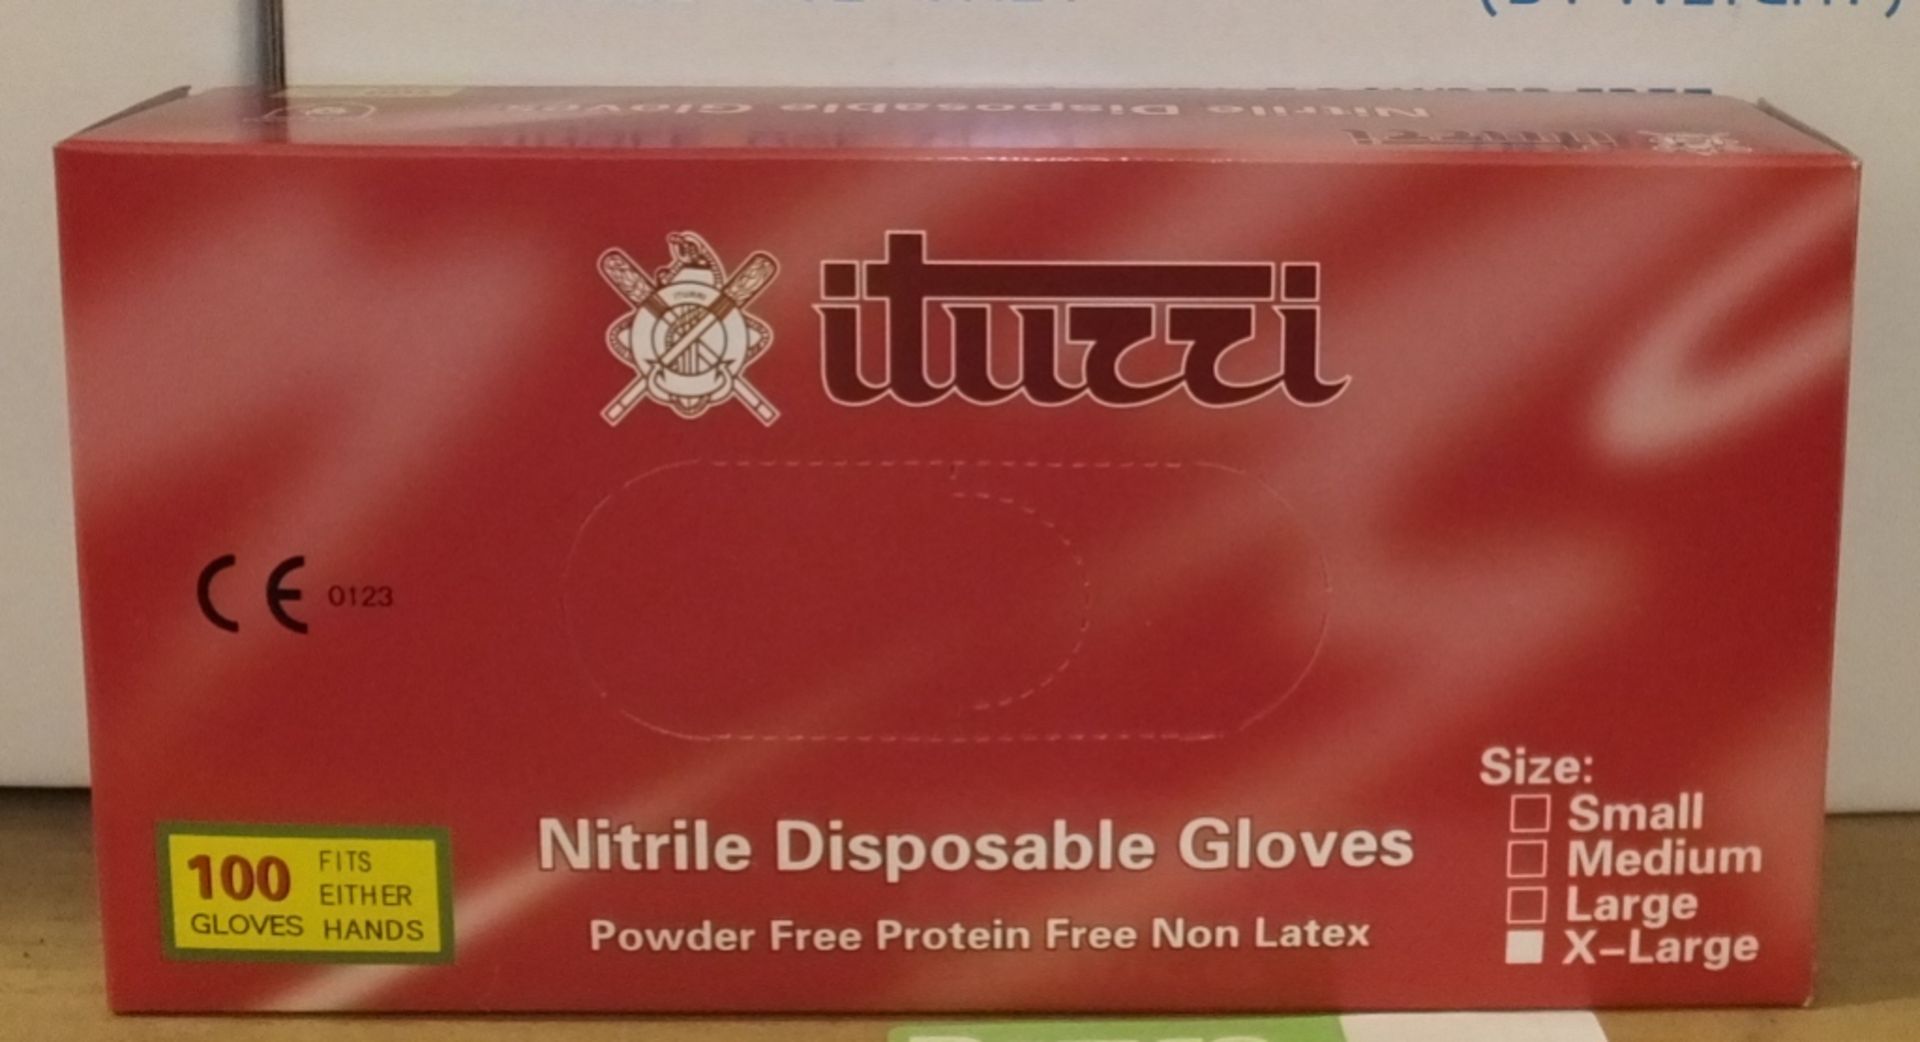 Nitrile disposable gloves - 10 boxes - 100 per box - 3 boxes - Image 2 of 2